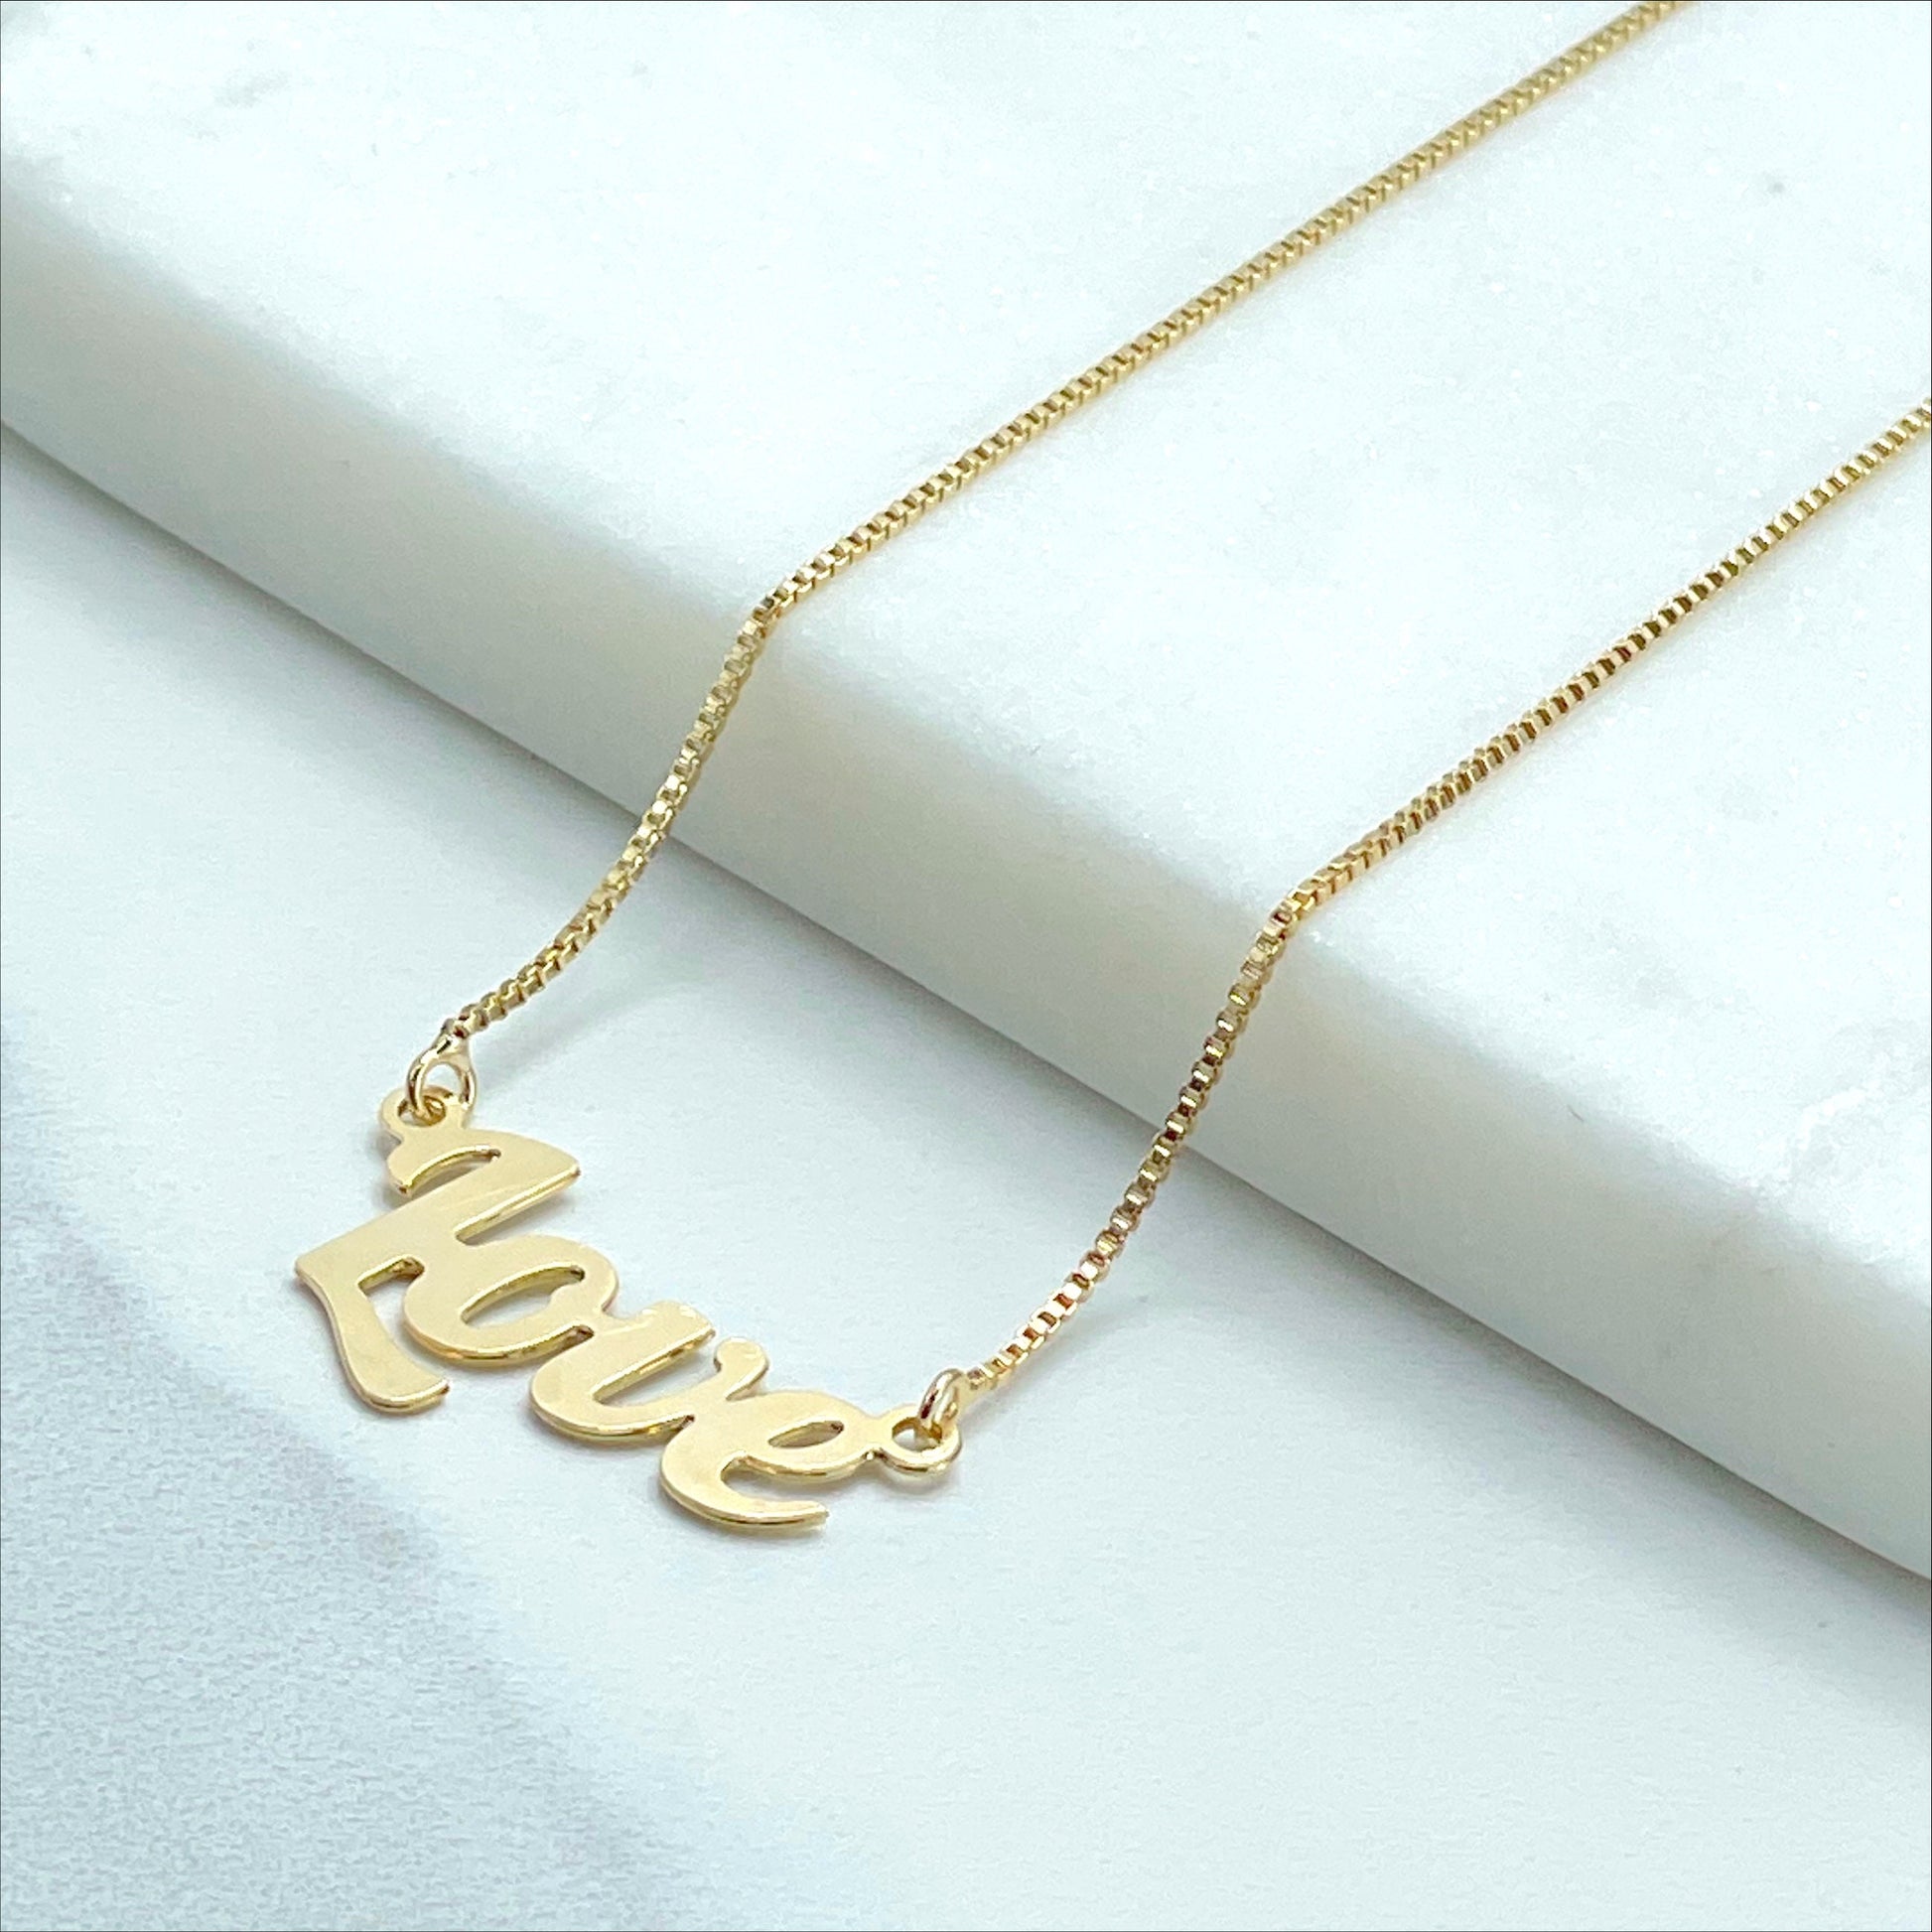 18k Gold Filled 1mm Box Chain Necklace with "LOVE" Word Letters Charm, Wholesale Jewelry Making Supplies